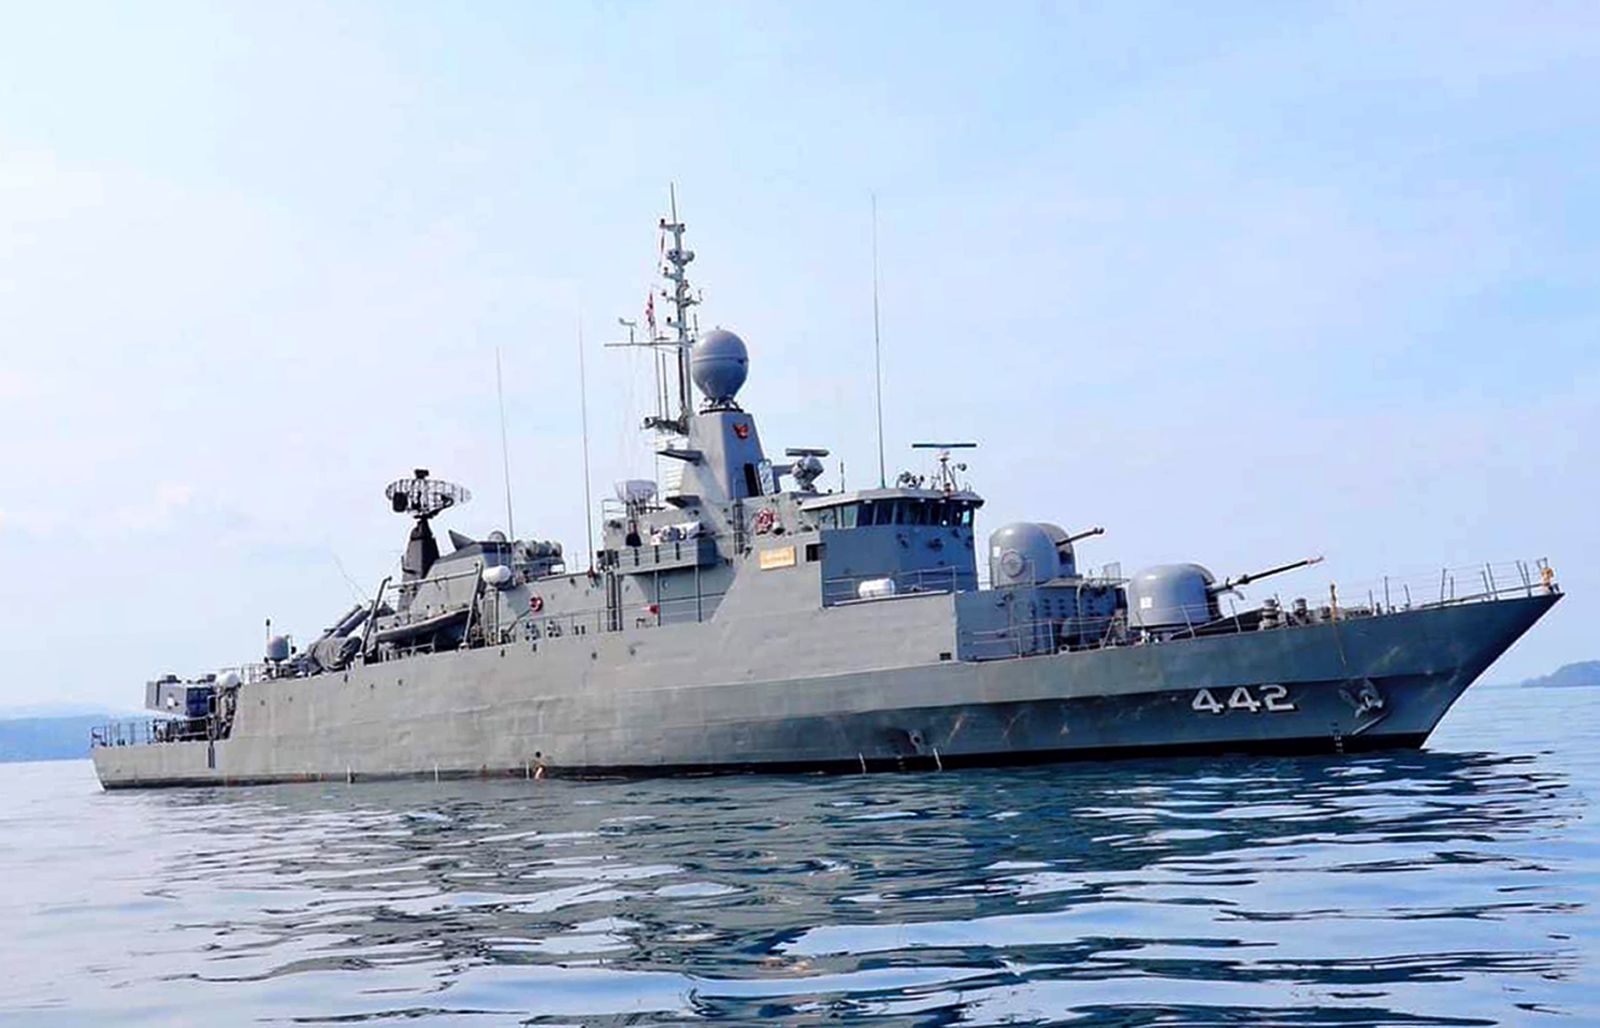 epa10373642 (FILE) - An undated handout file photo made available by the Royal Thai Navy (RTN) on 19 December 2022 shows the Royal Thai Navy Ratanakosin-class corvette, HMS Sukhothai in the Gulf of Thailand. The Royal Thai Navy ship HTMS Sukhothai, carrying over 100 crew, capsized and sank in rough seas in the Gulf of Thailand on late 18 December night. Authorities rescued most of the crew and a search for 31 missing sailors continued on 19 December, Thai Navy spokesman Pogkrong Monthardpalin said.  EPA/THE ROYAL THAI NAVY HANDOUT -- MANDATORY CREDIT -- BEST QUALITY AVAILABLE -- HANDOUT EDITORIAL USE ONLY/NO SALES